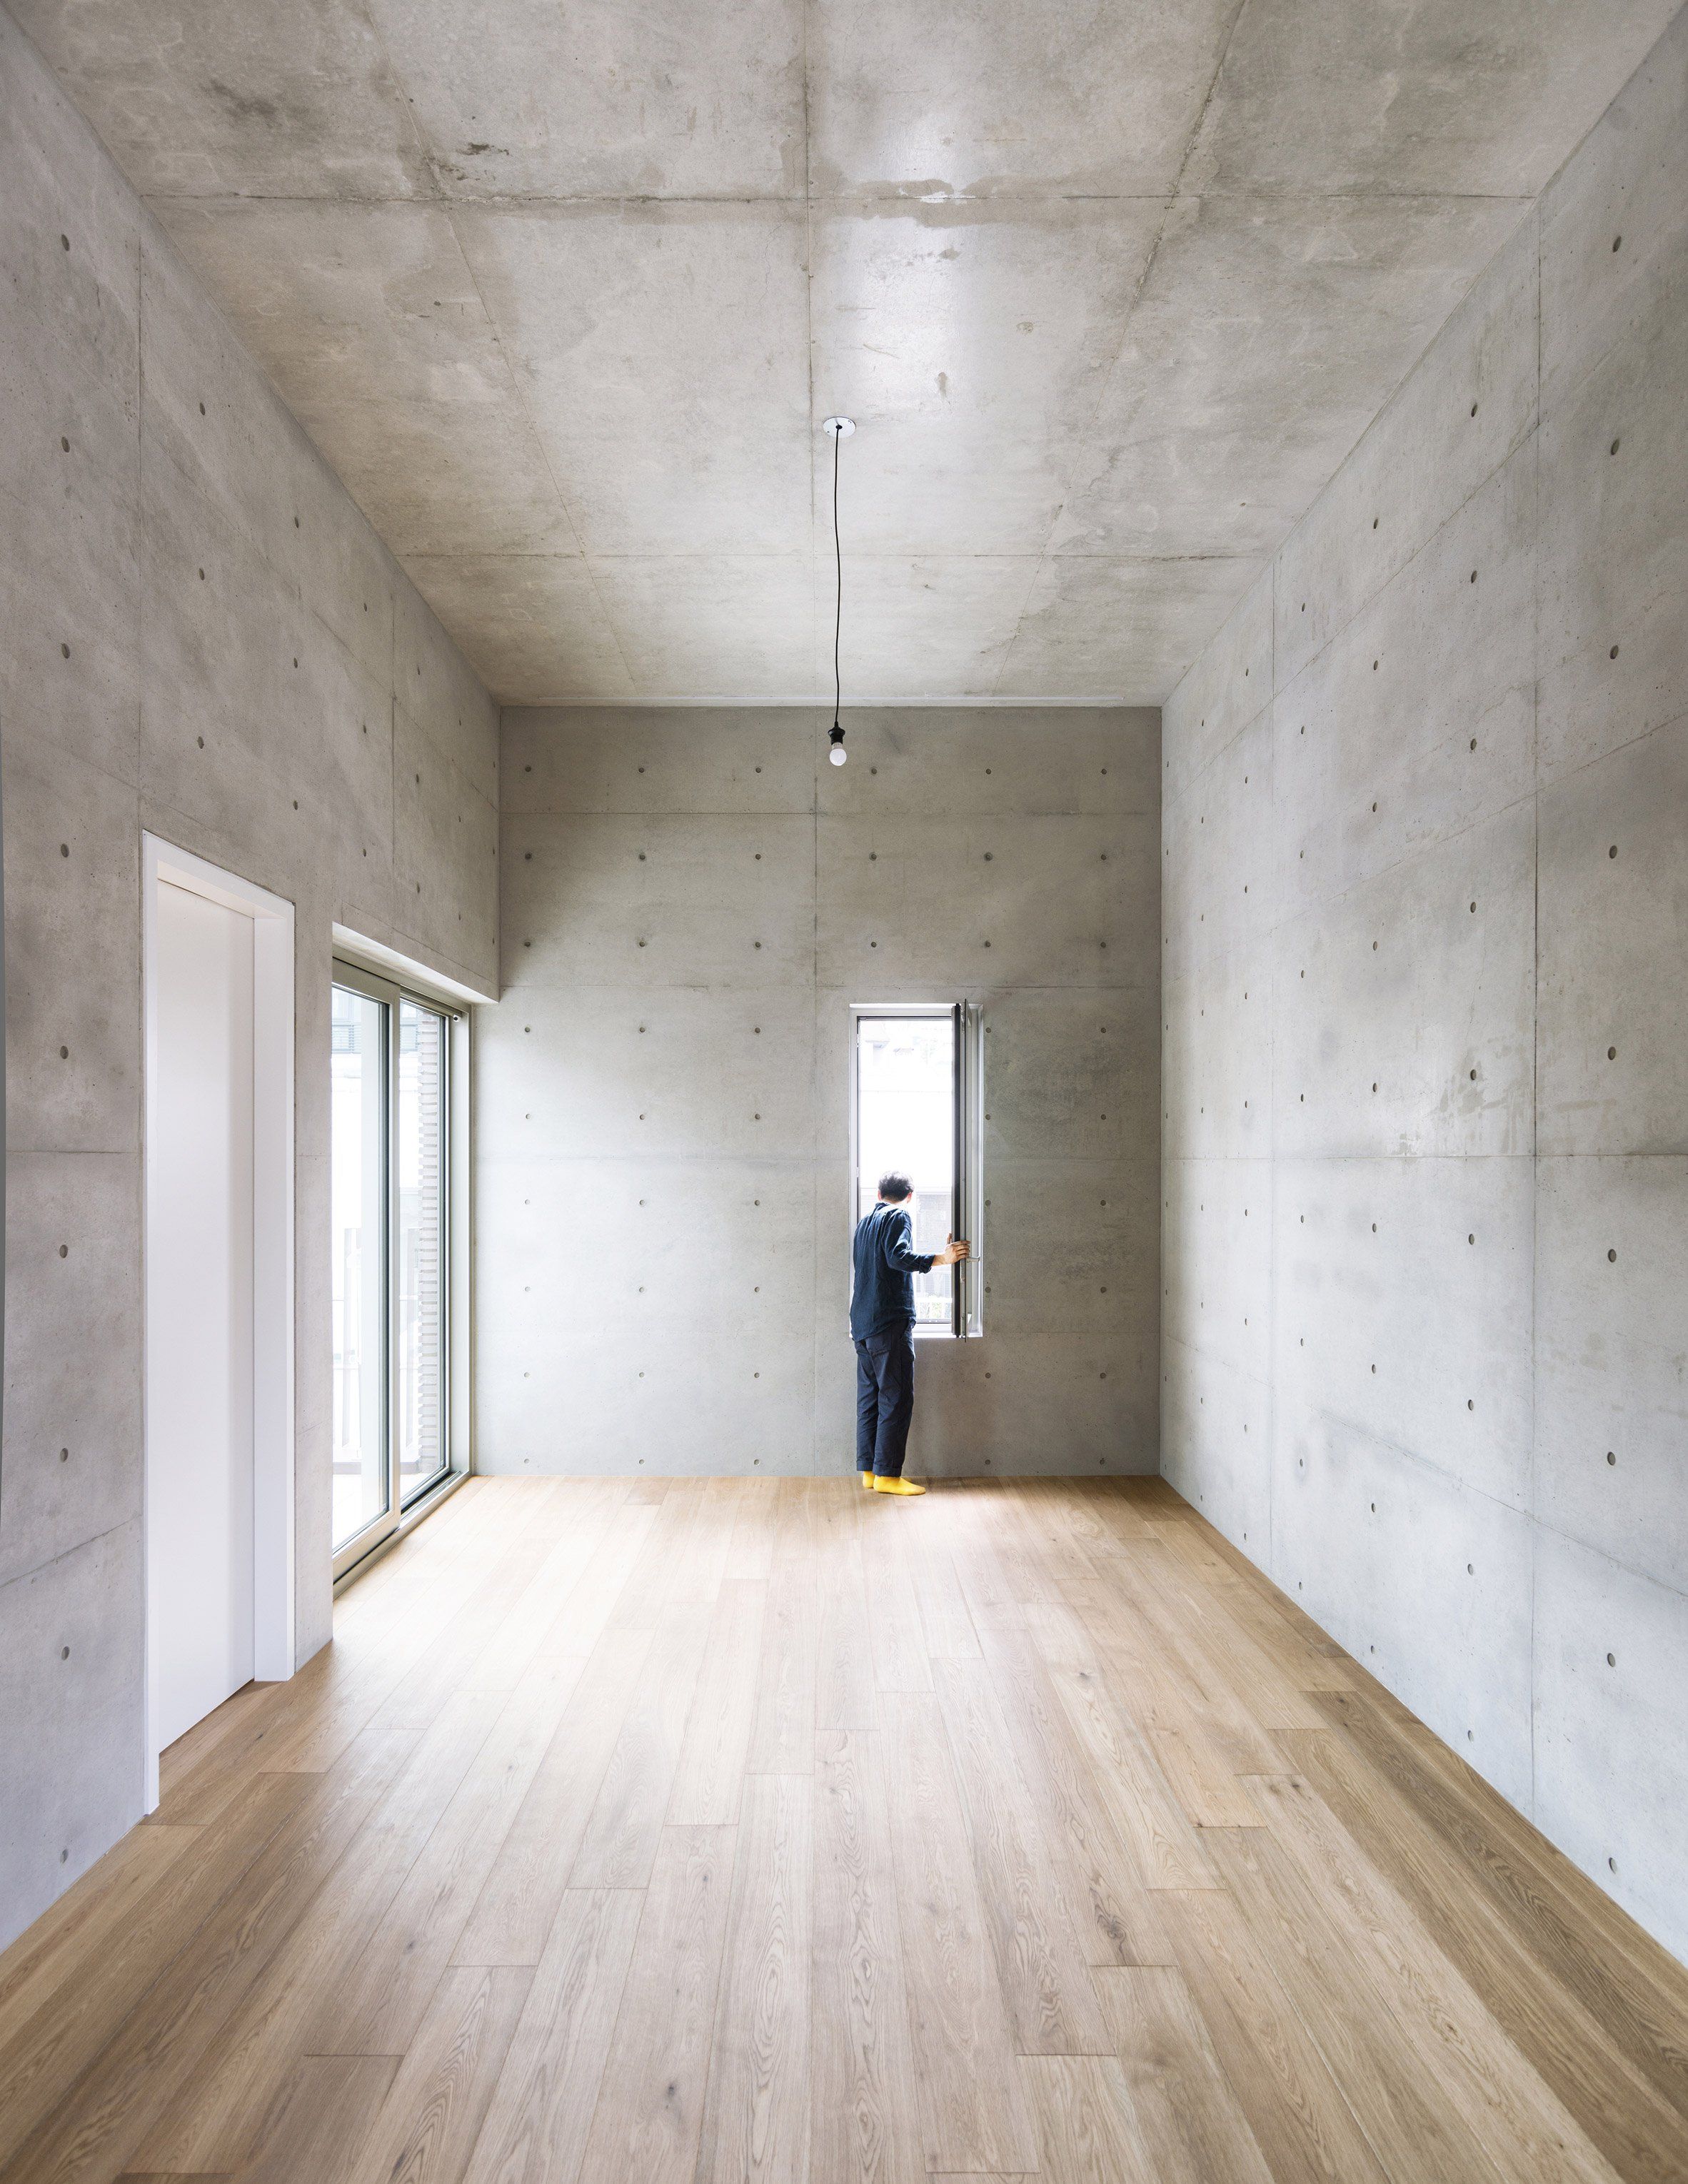 The inside of this building is finished minimally with reinforced ...